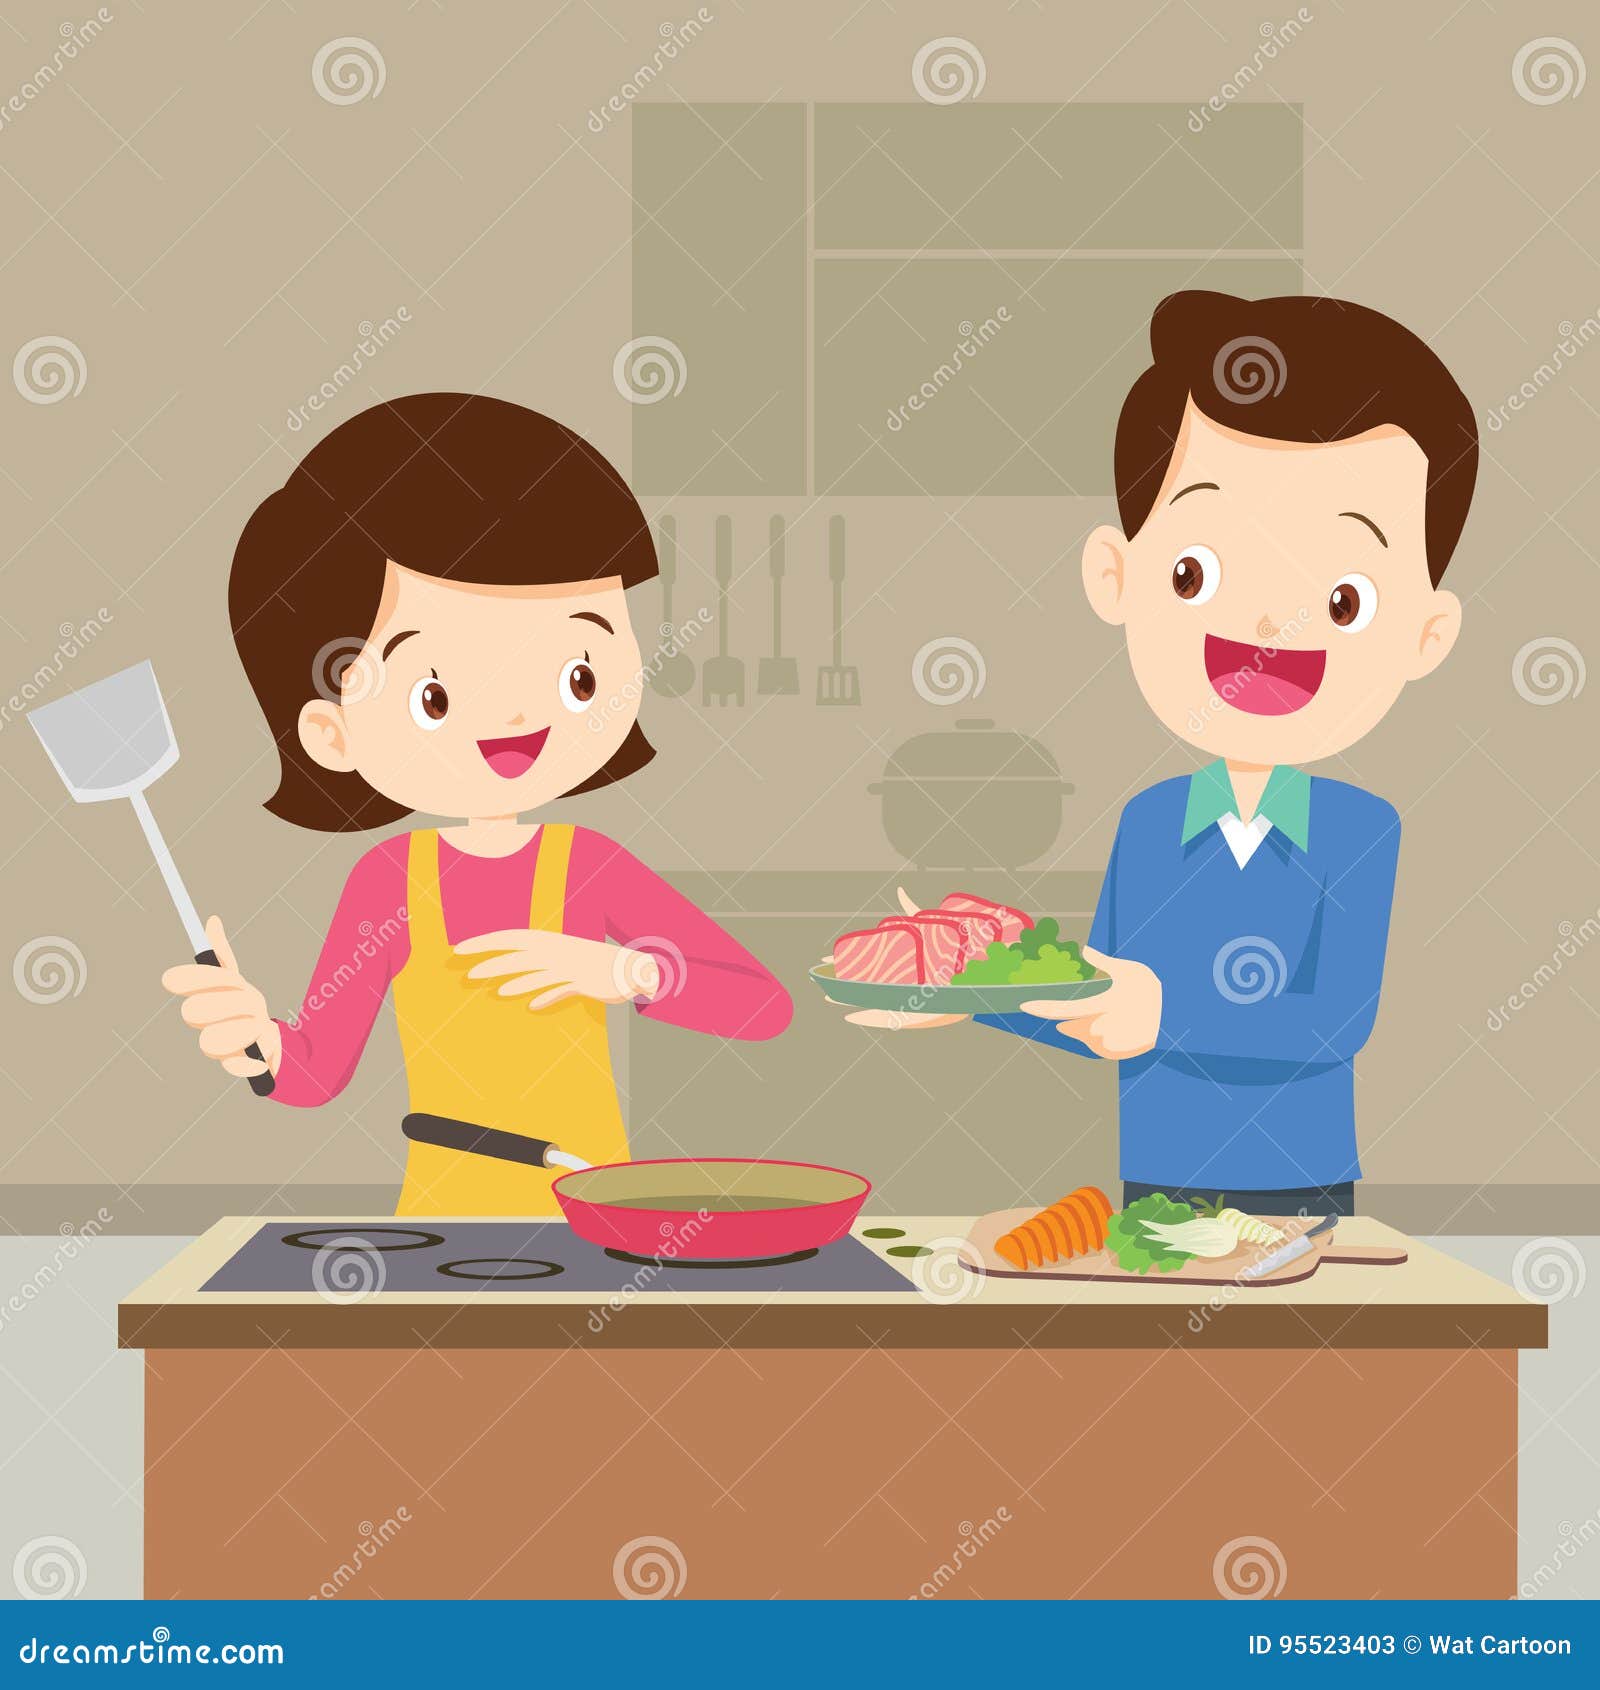 husband and wife are preparing together